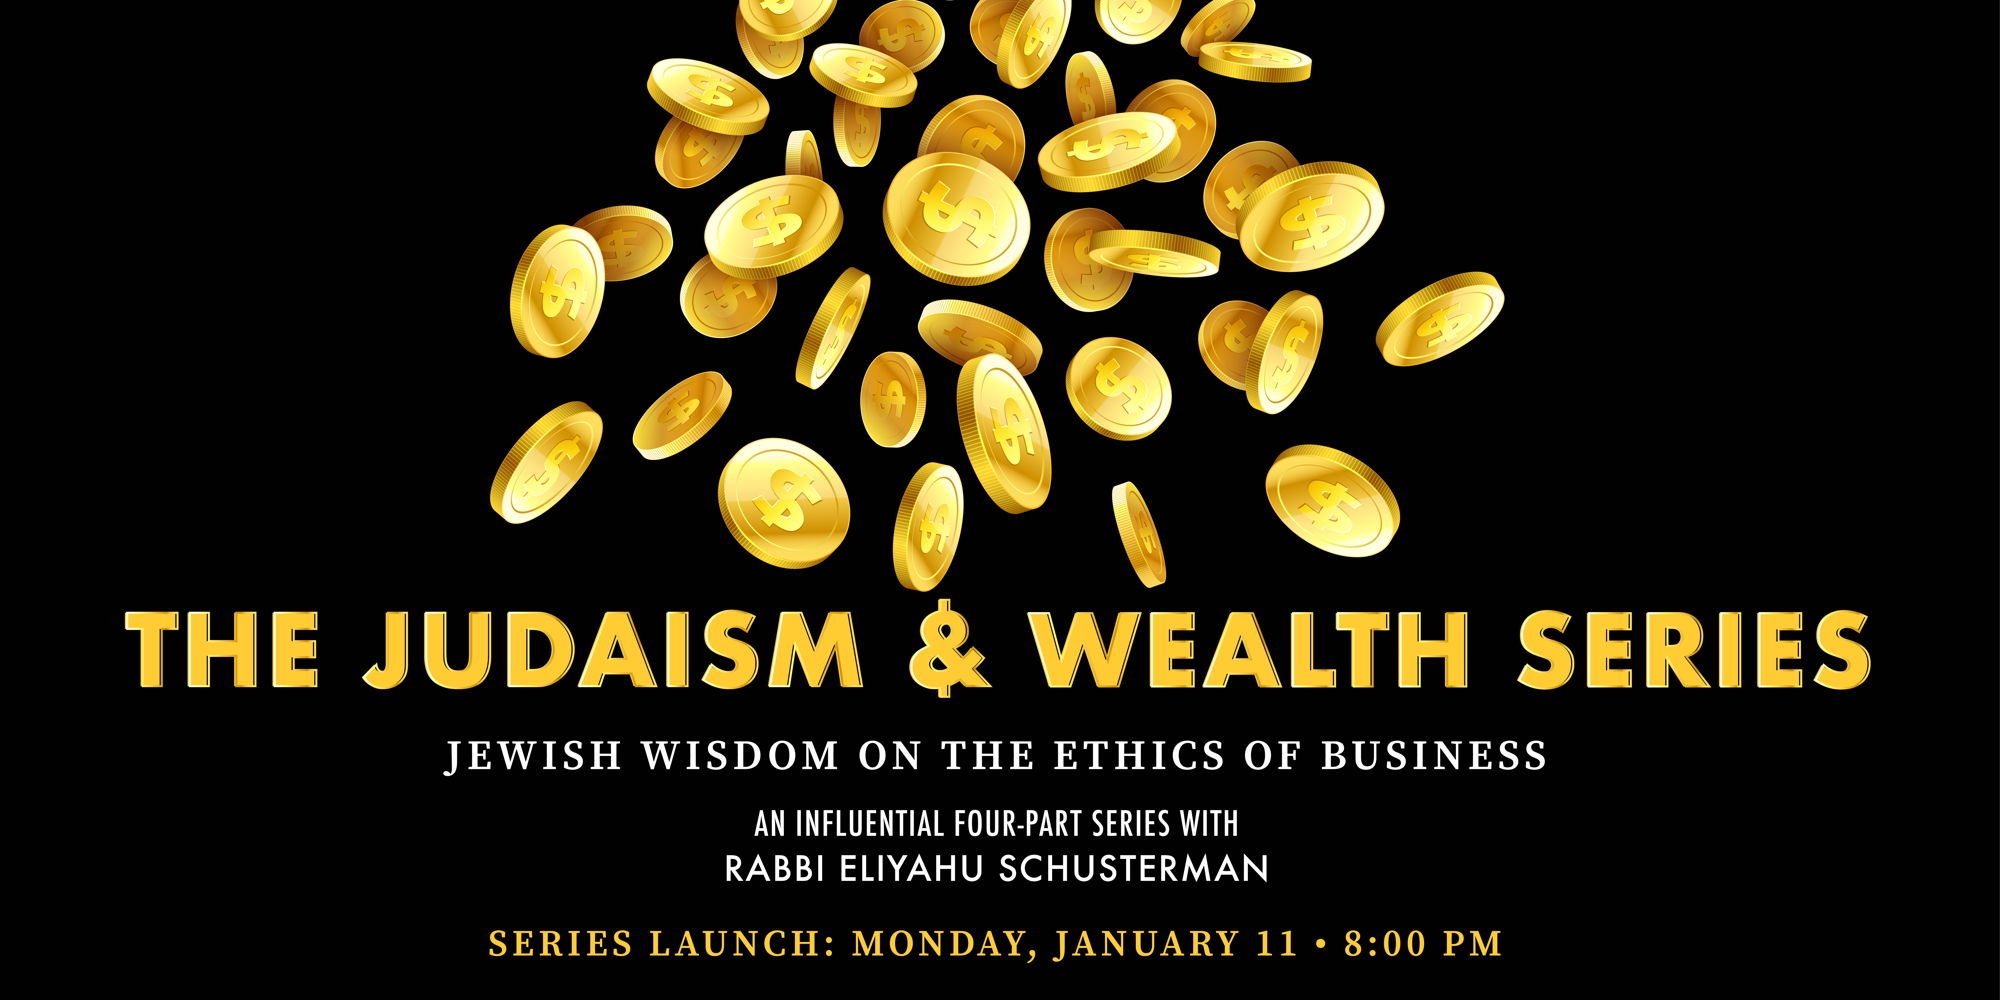 The Judaism & Wealth Series promotional image